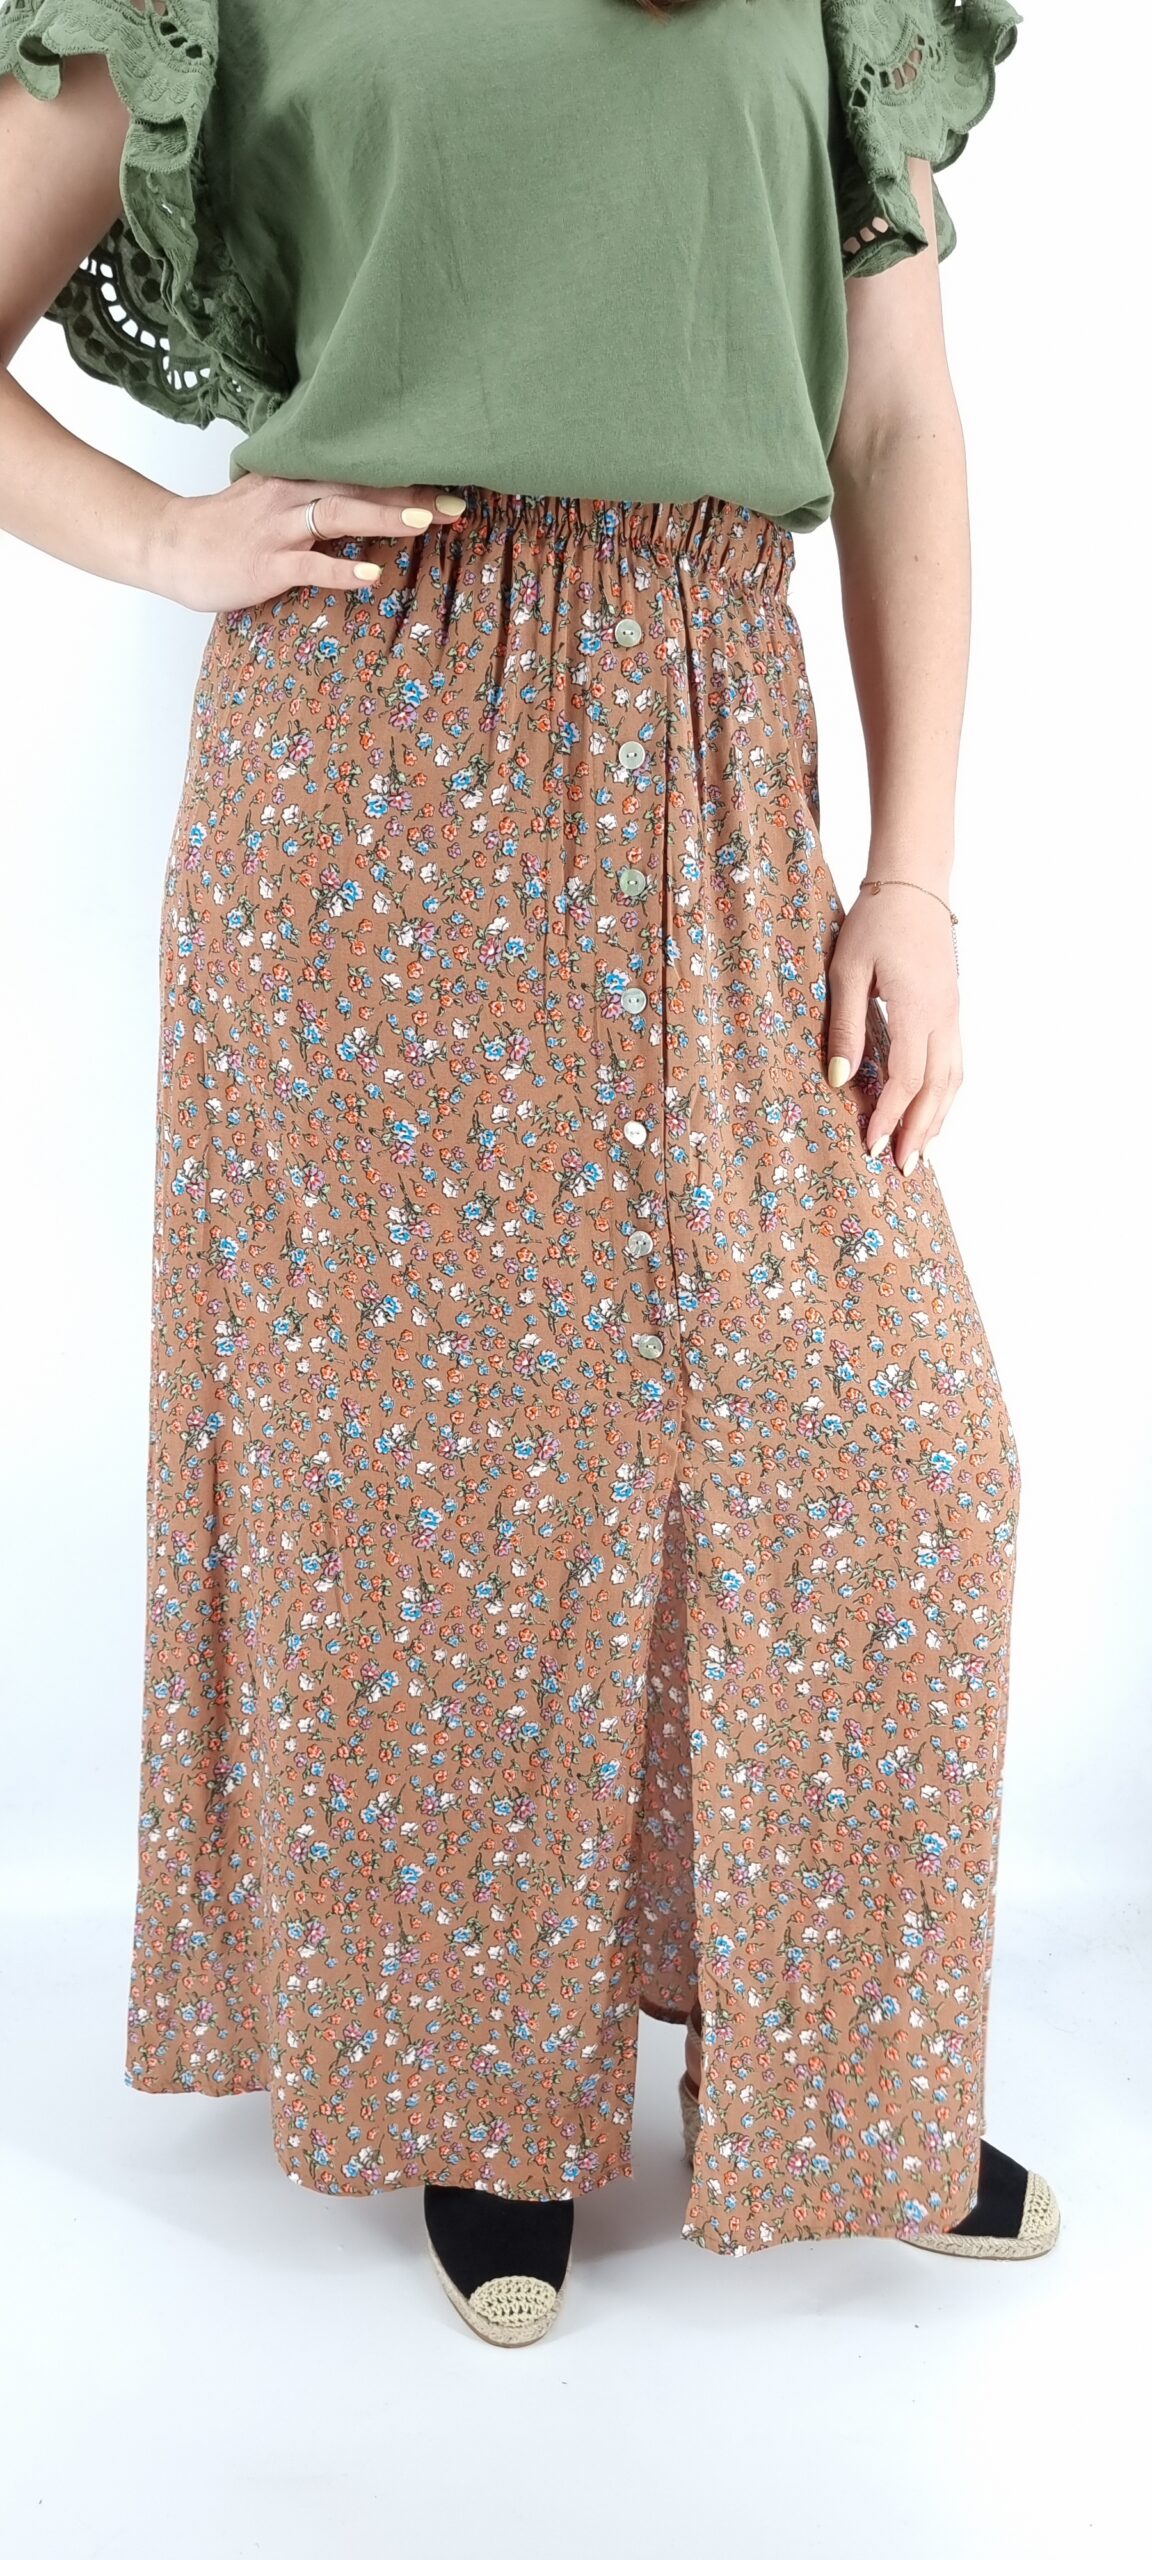 Long floral skirt with elastic waist and decorative buttons blue